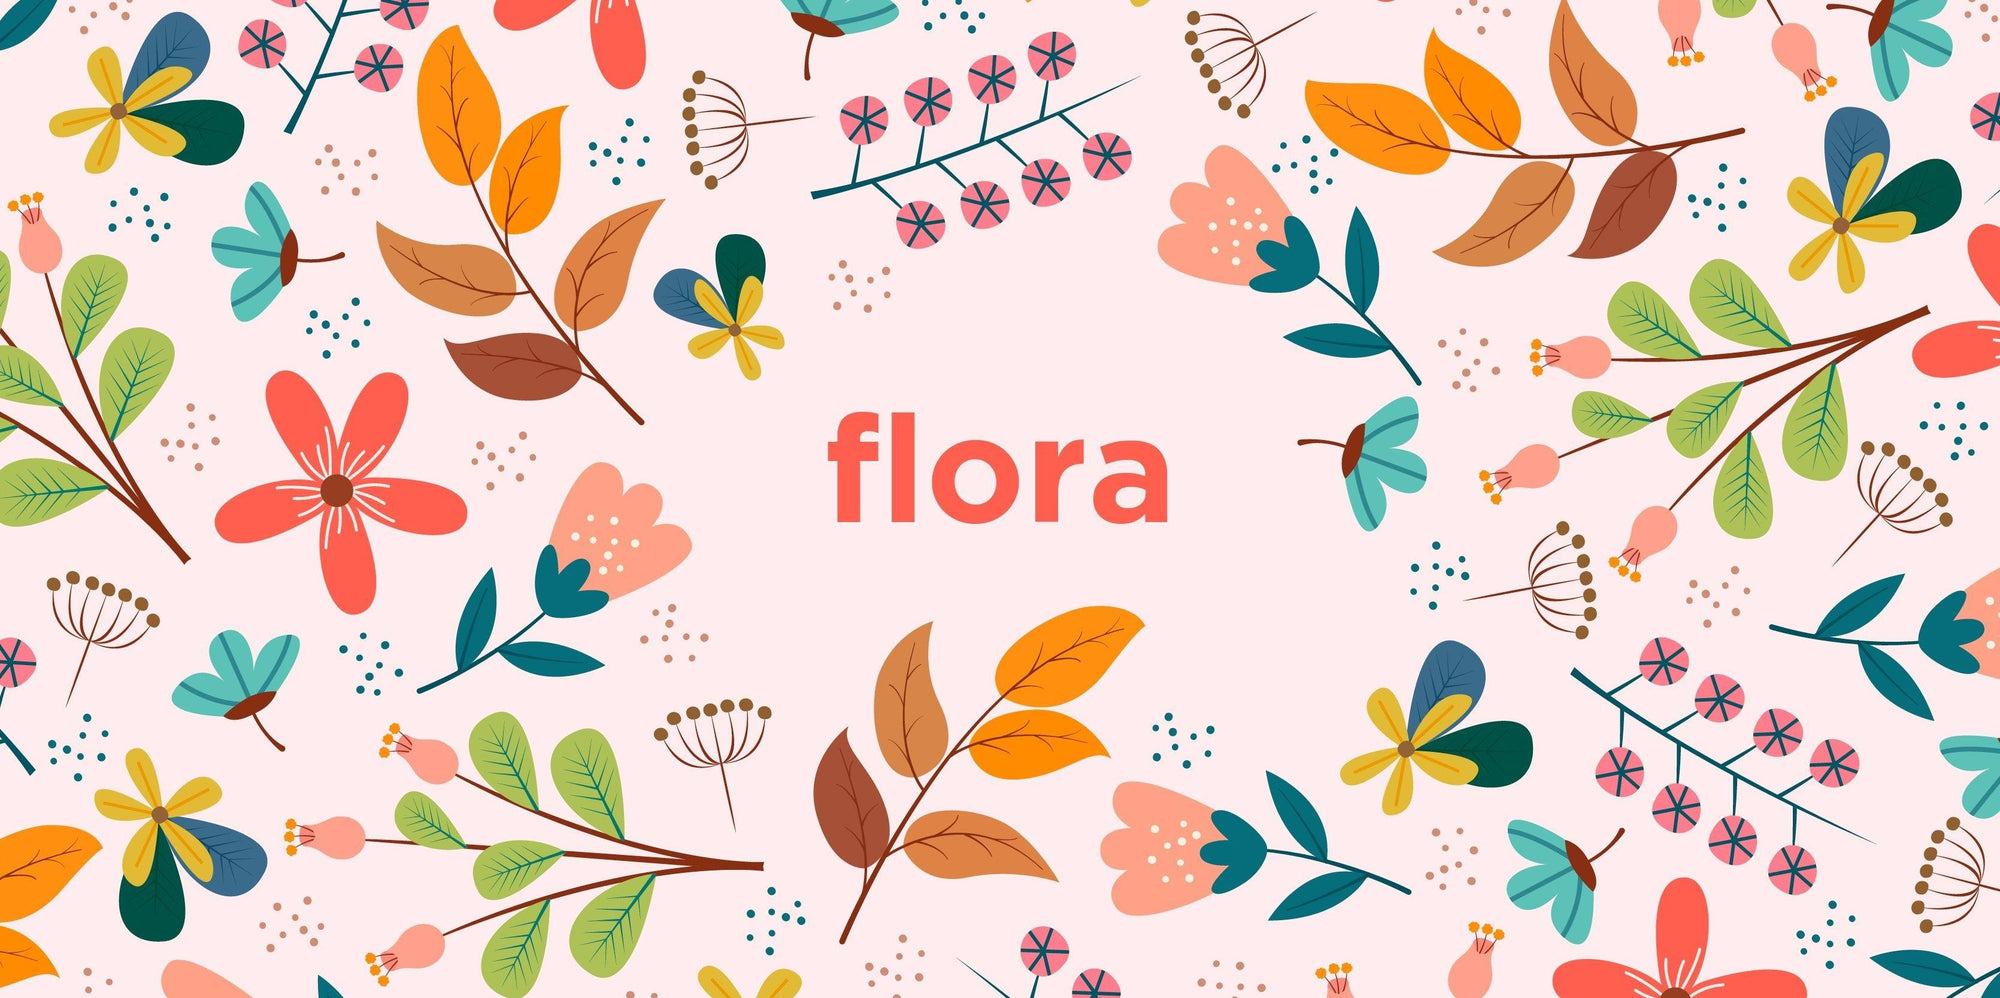 Floral Window Cling Stickers | Stickers4 | Seasonal shop window display stickers | UK - Stickers4